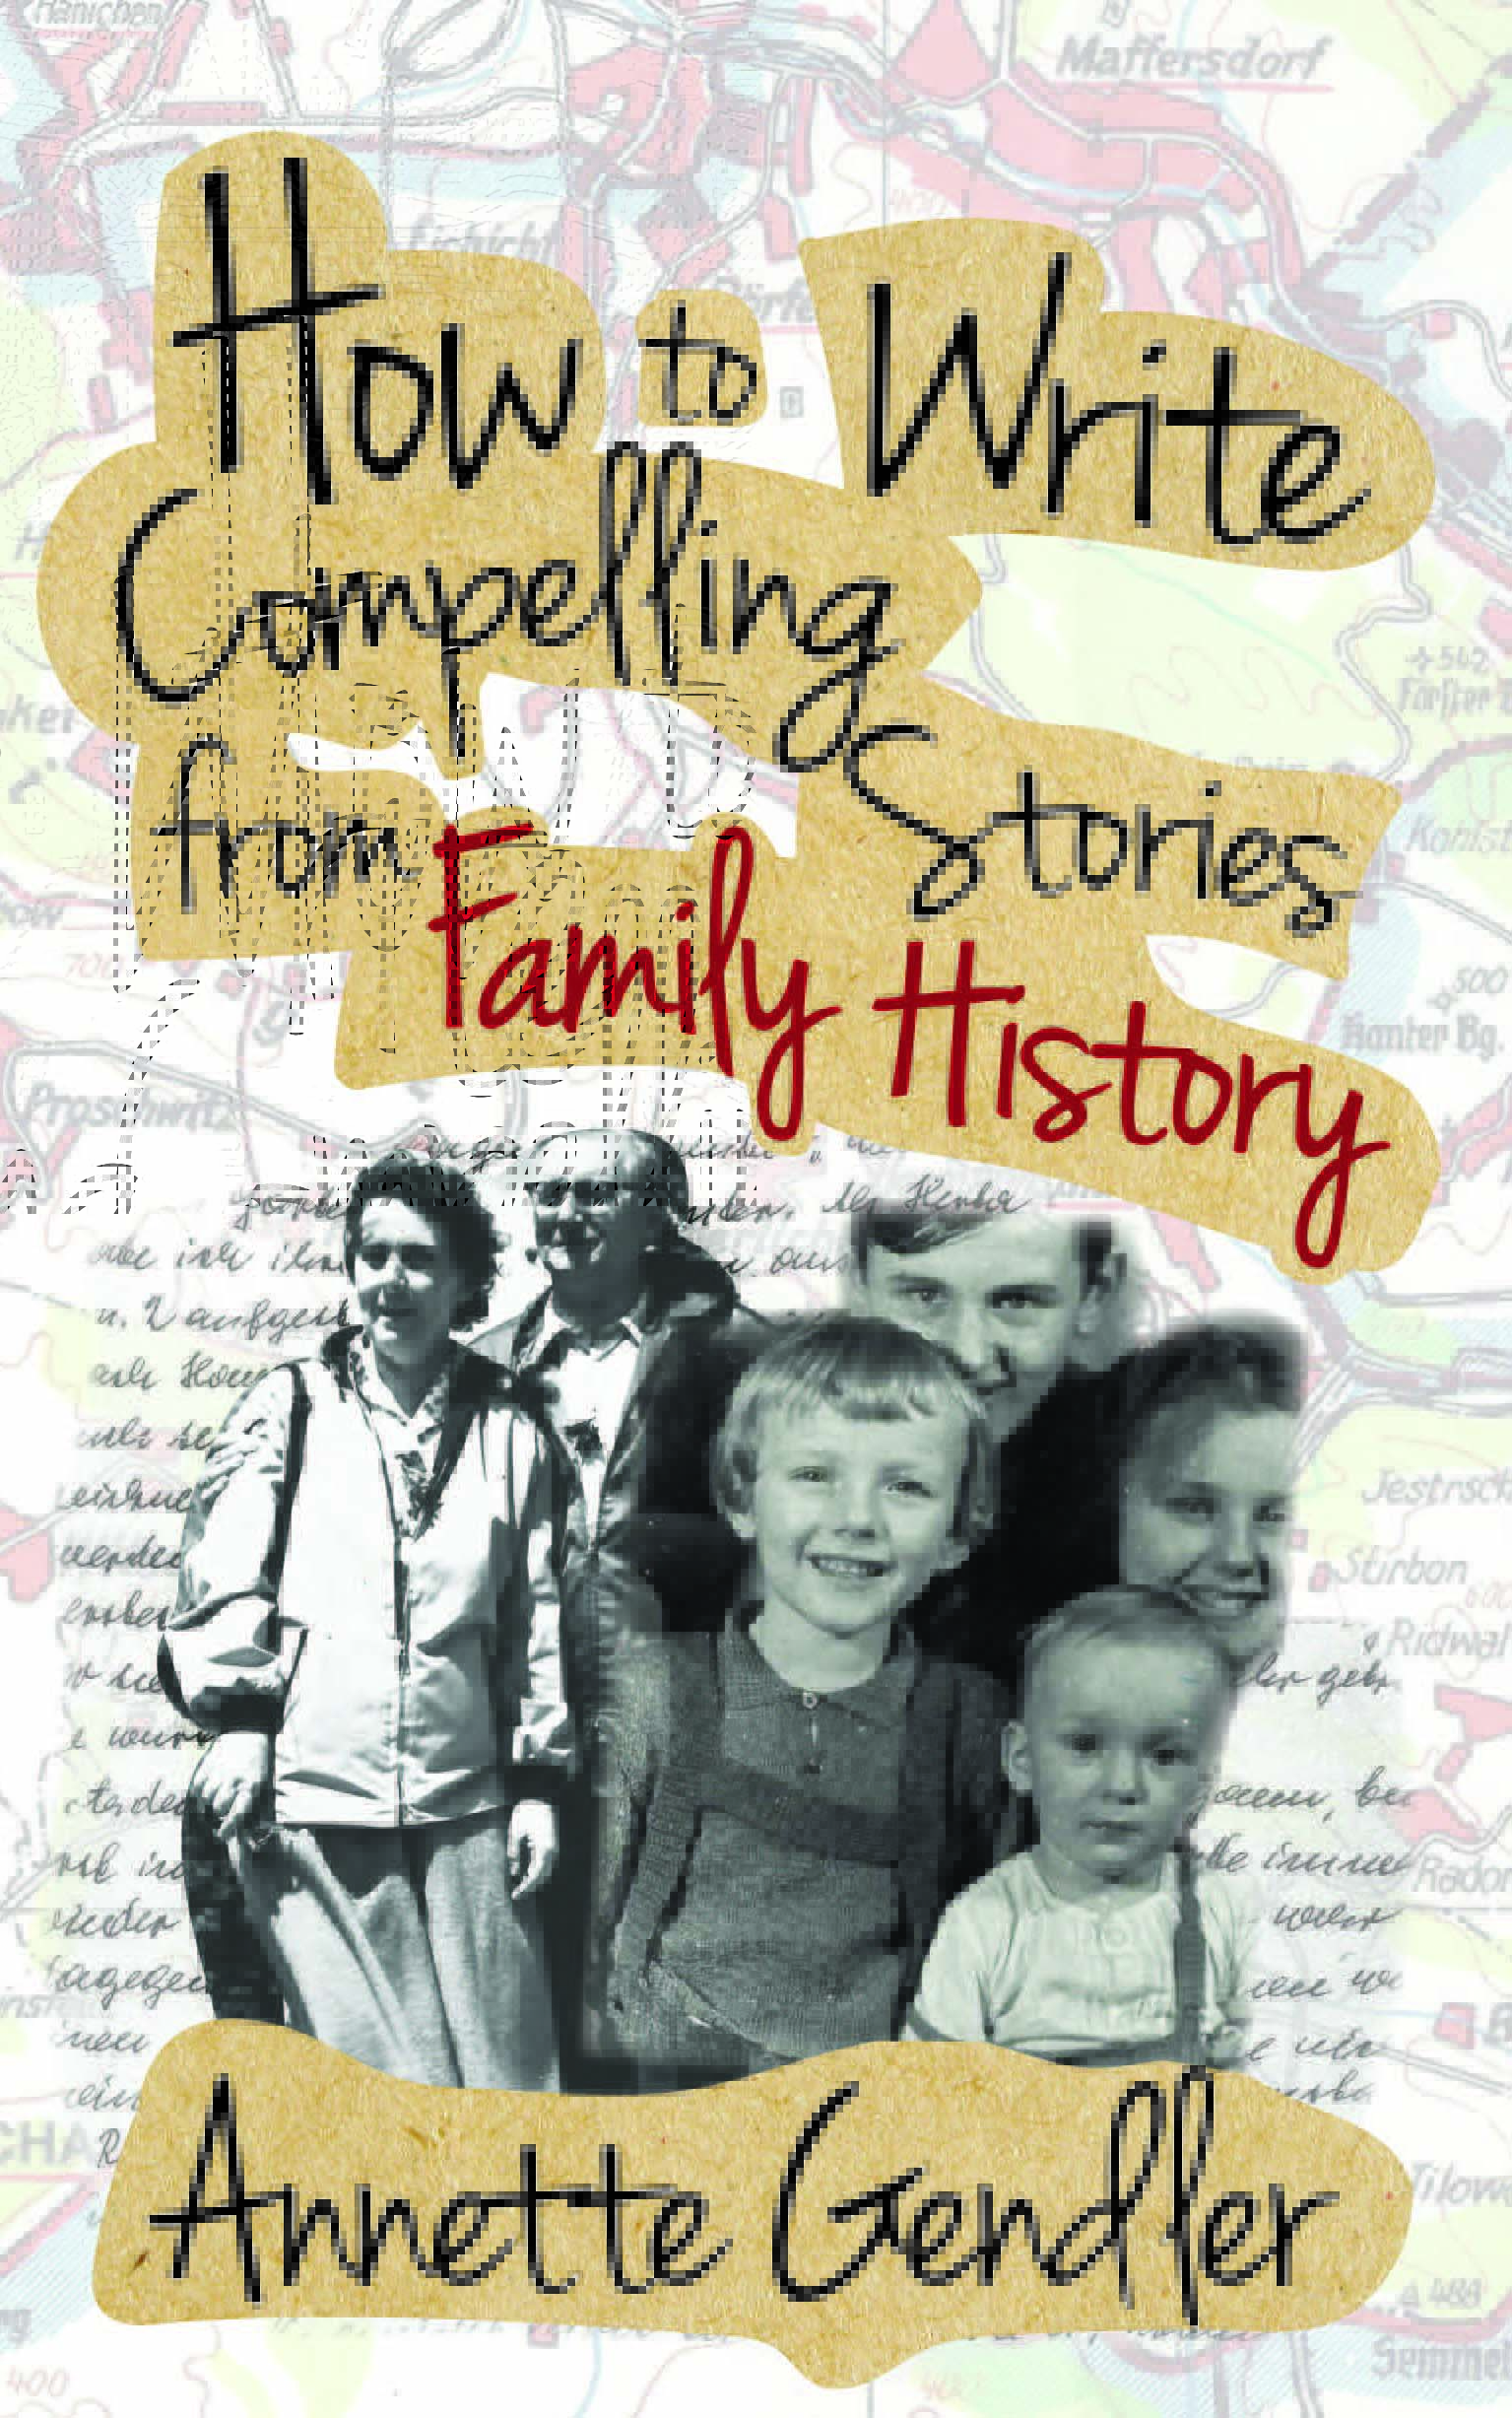 How to Write Compelling Stories from Family History - Annette Gendler